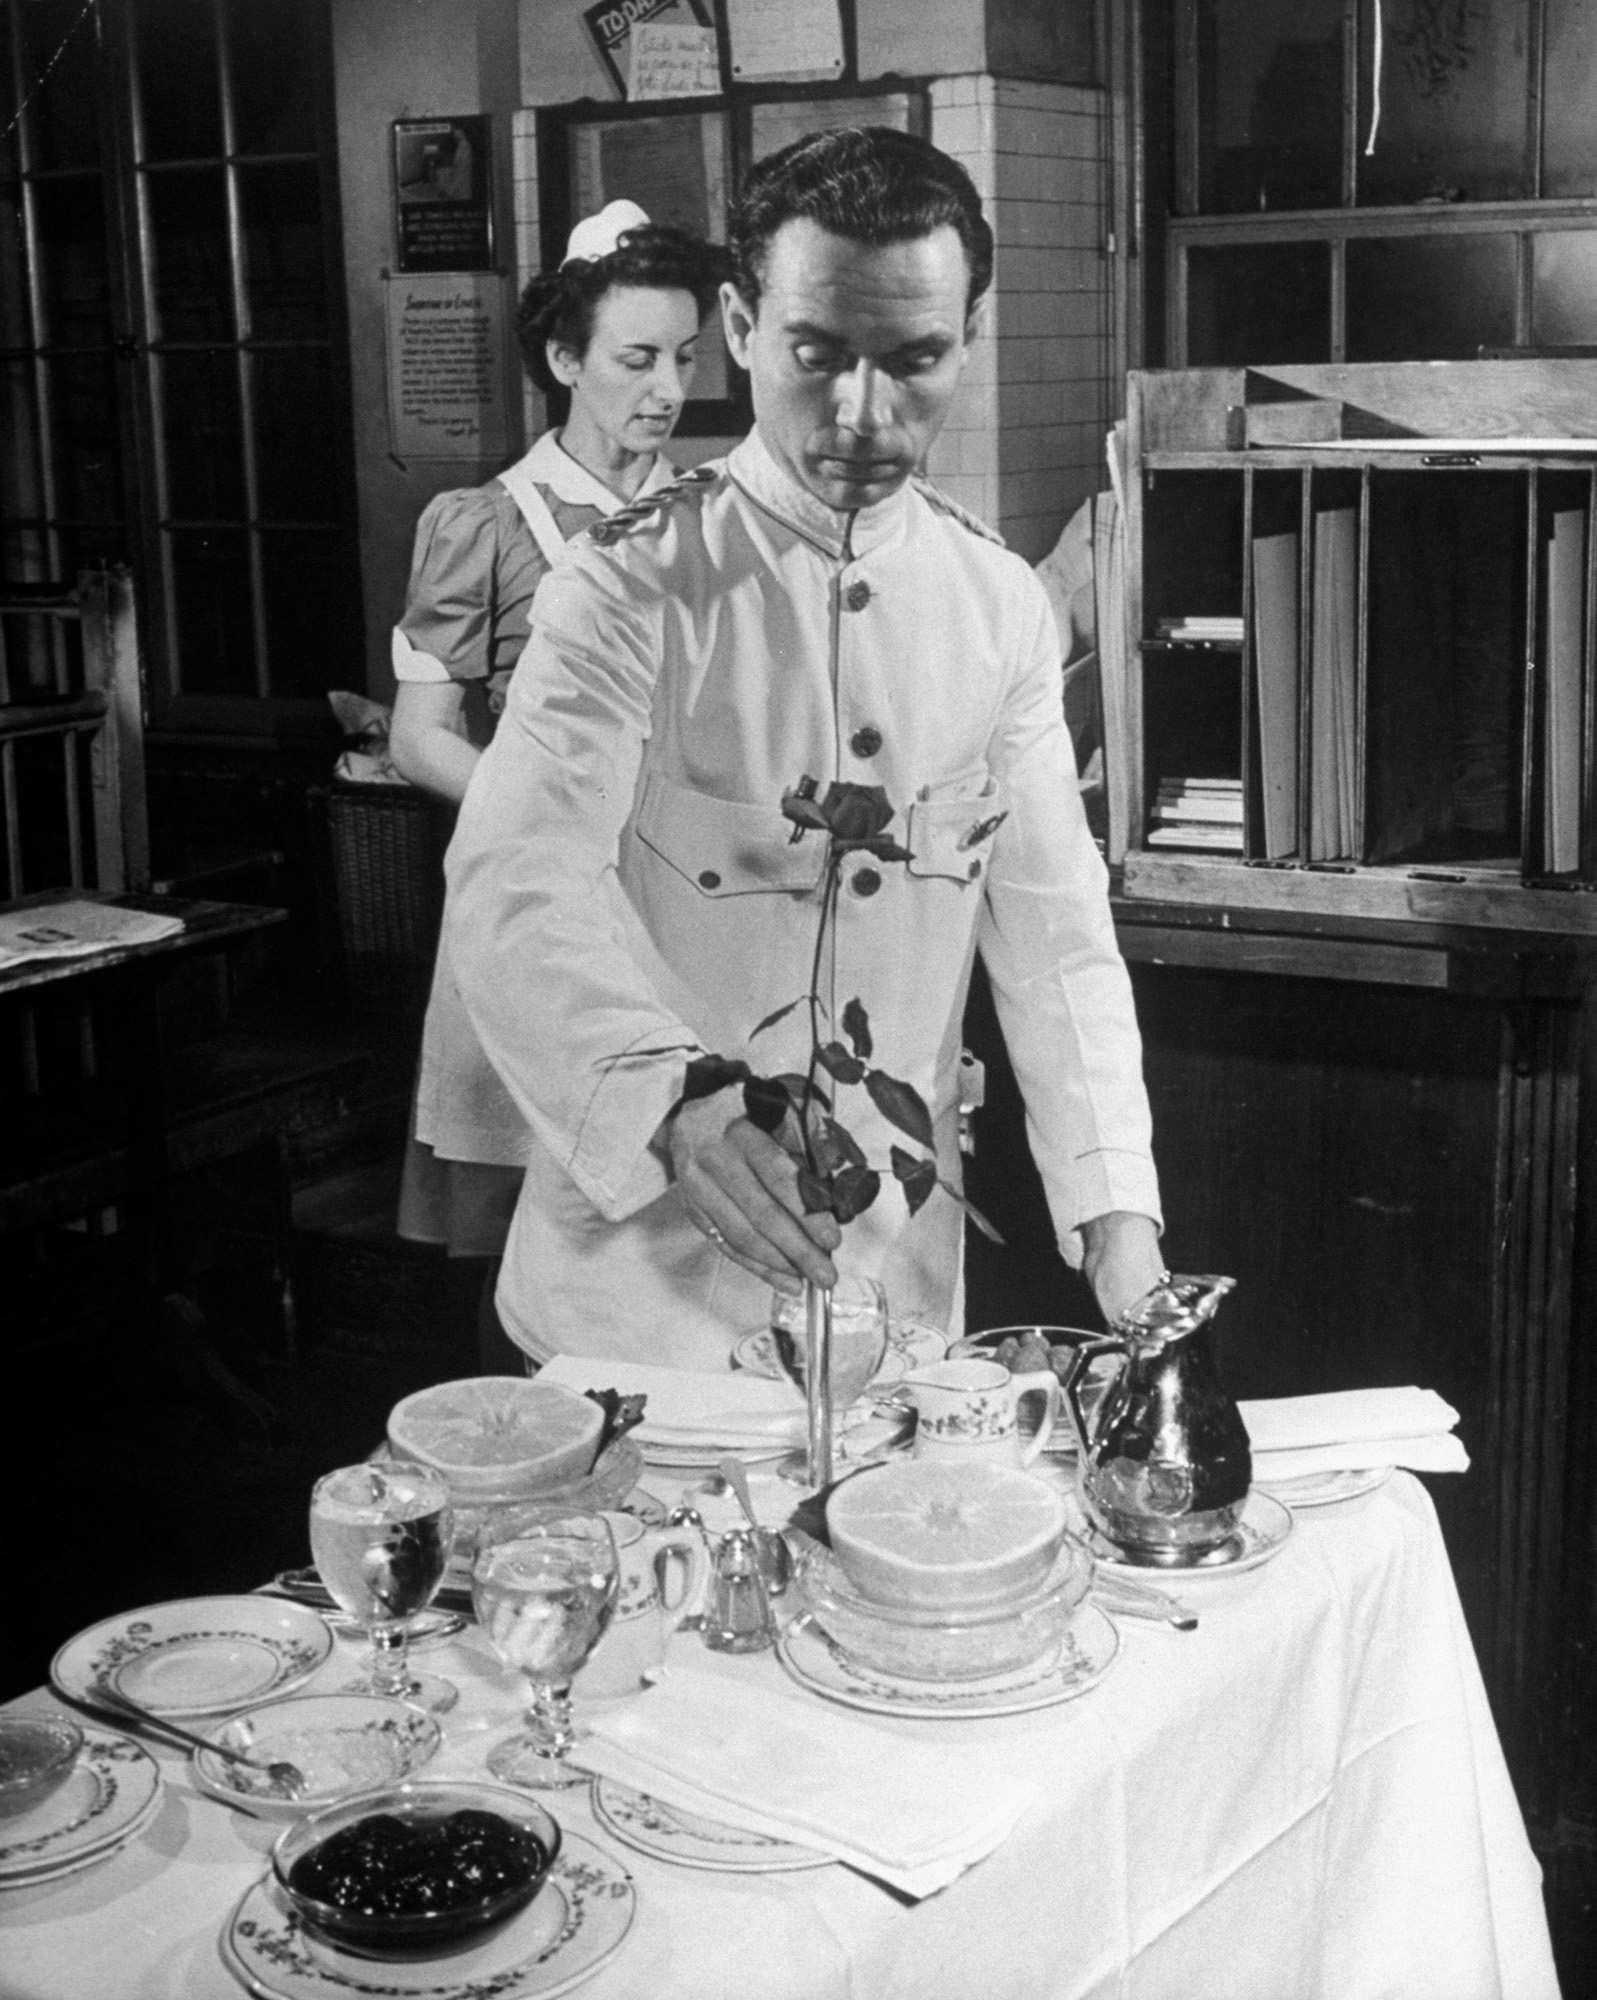 A Waiter Preparing to Deliver a Room Service Meal in 1931